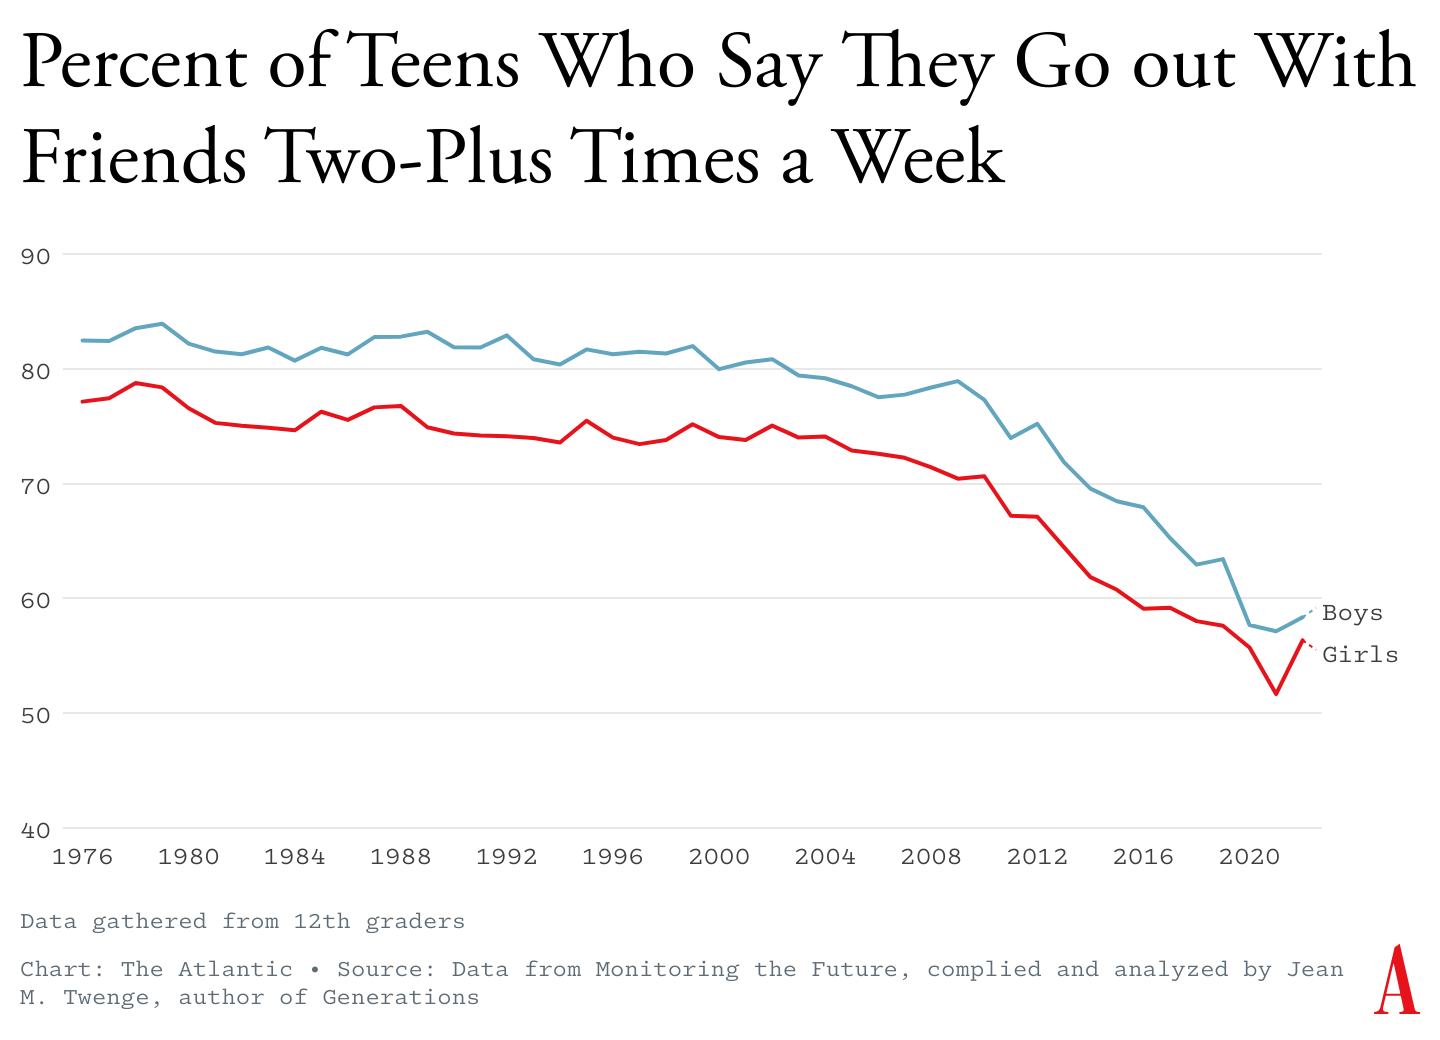 Graph showing downward trend in percent of teens who say they go out with friends twice a week or more